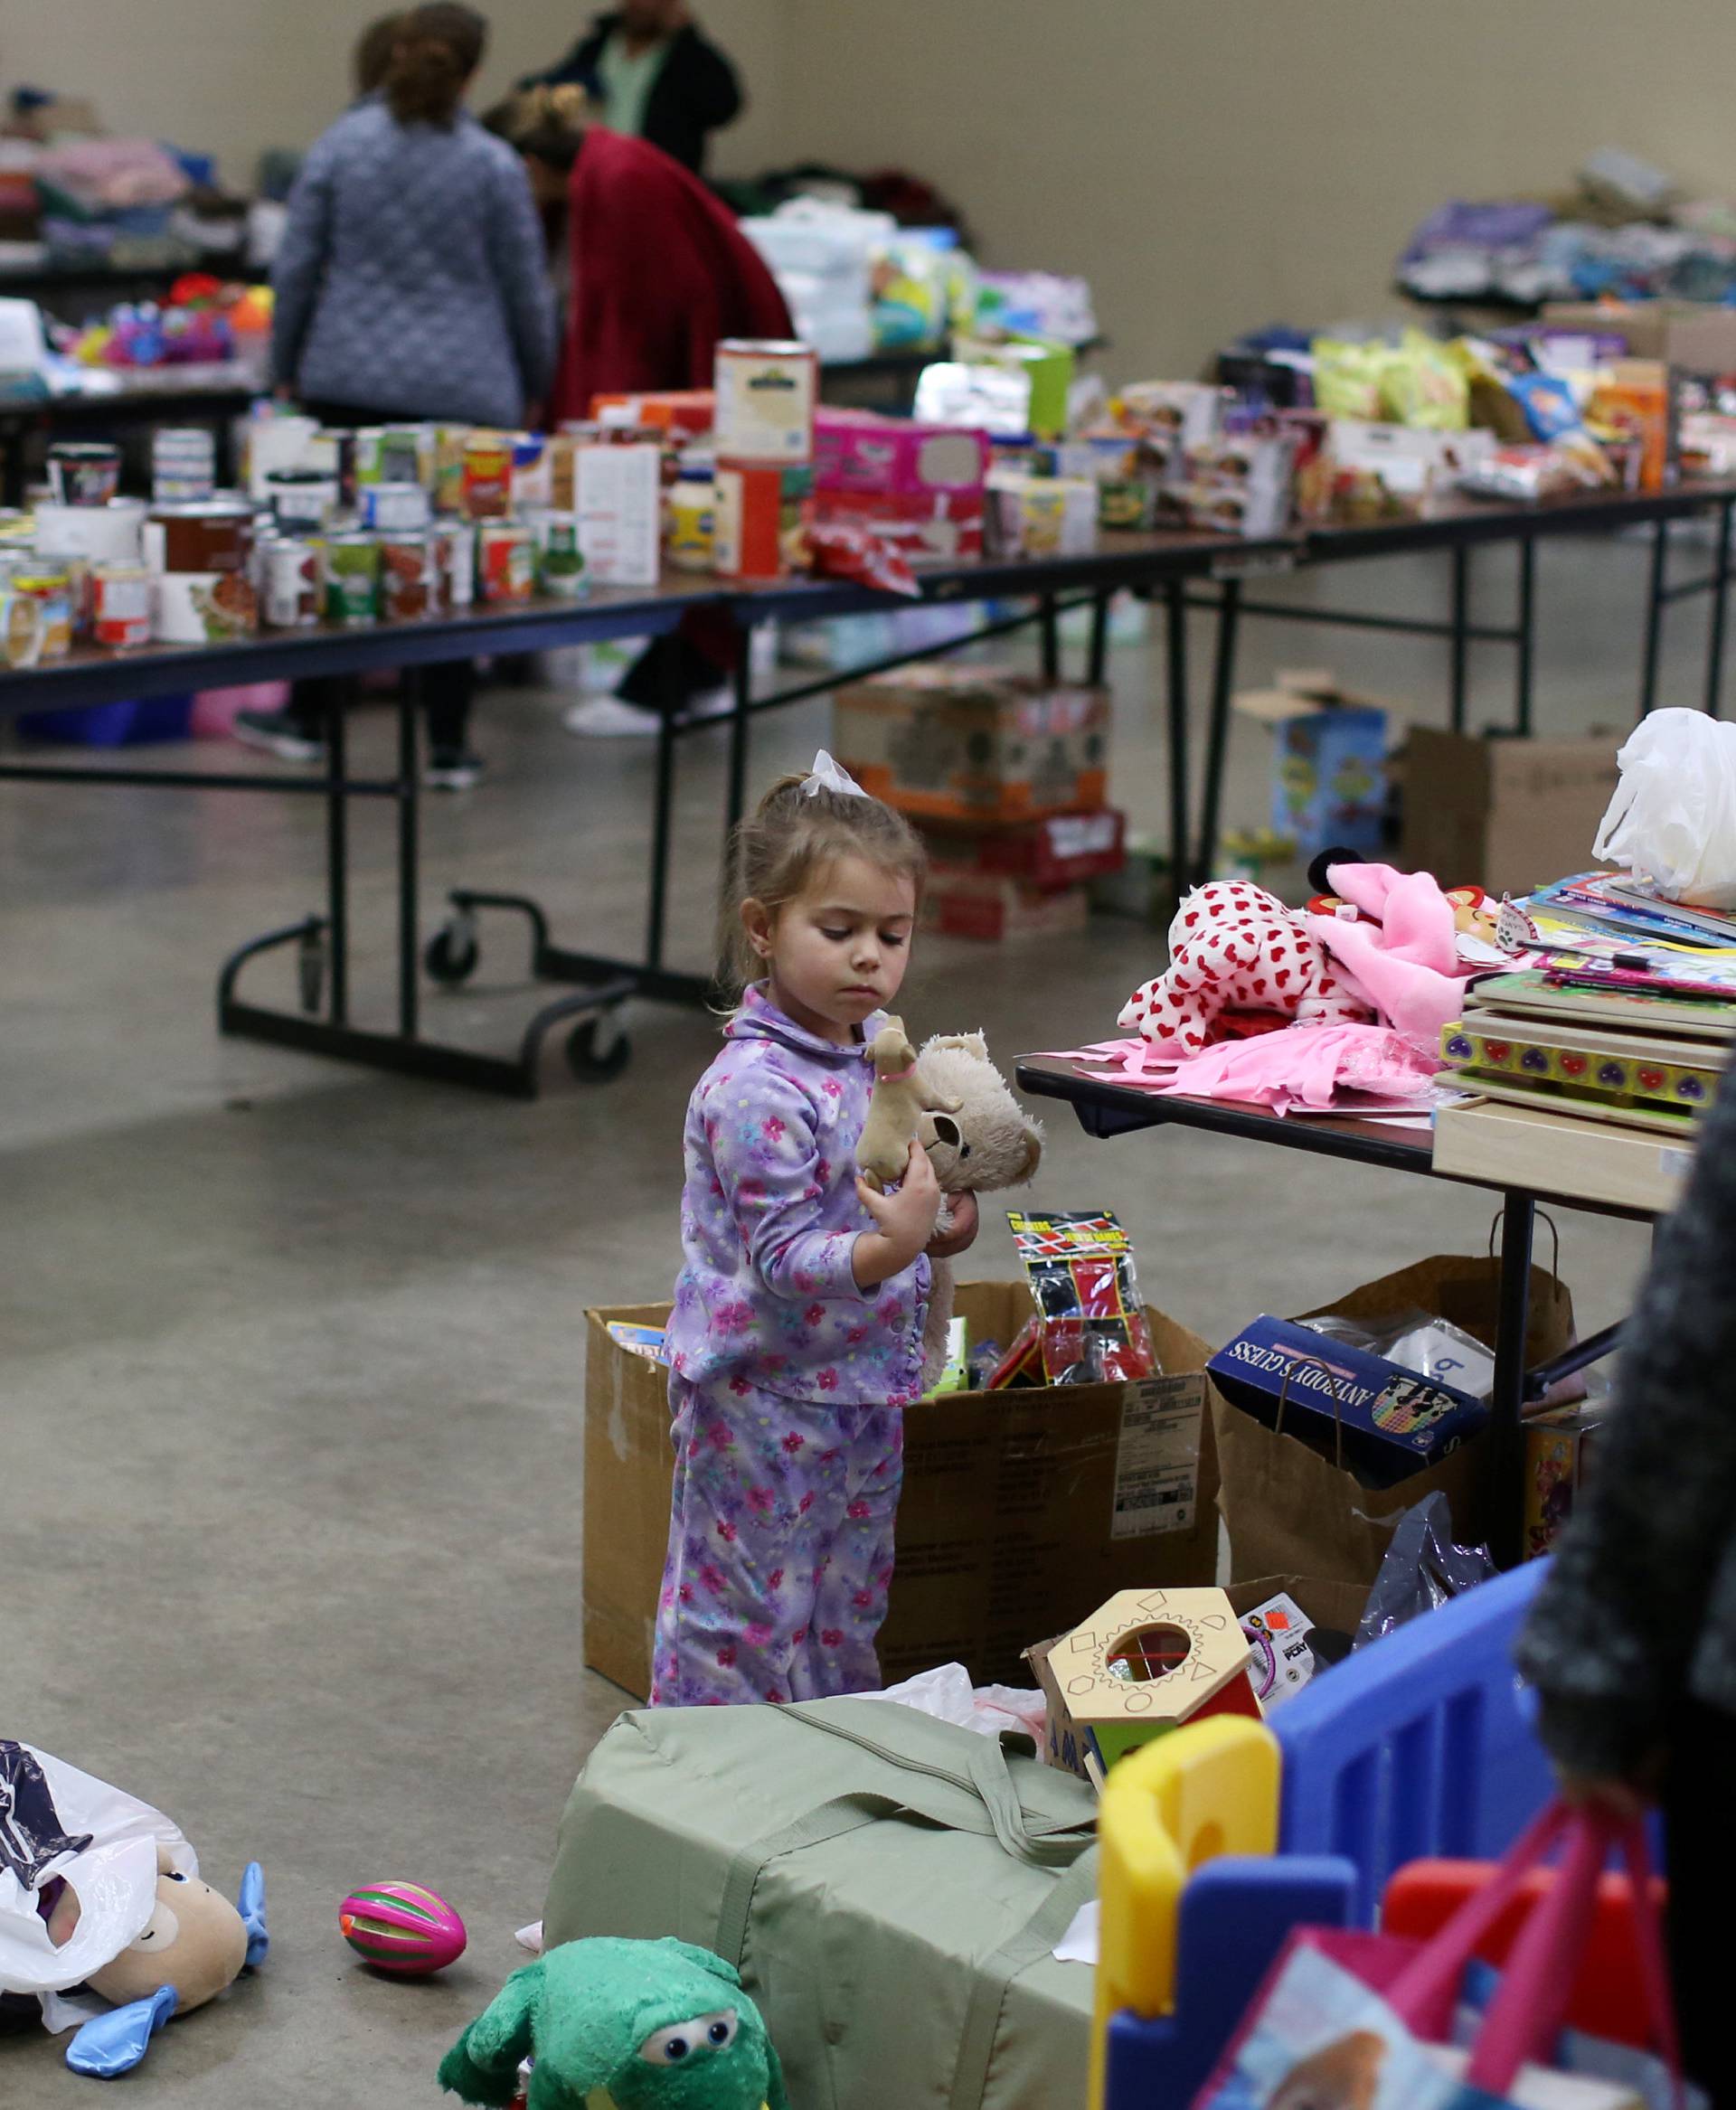 Emma Neurohr, 4, of Oroville, looks through toys from the Salvation Army relief center at the Placer County Fairgrounds in Roseville, California, after an evacuation was ordered for communities downstream from the dam in Oroville